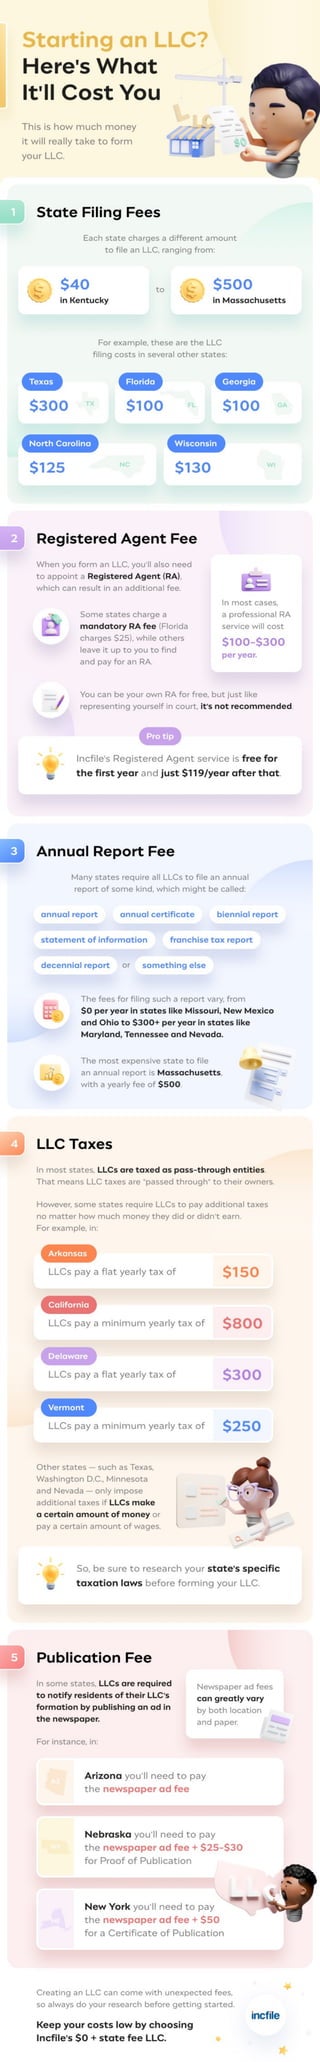 Real Breakdown of Costs to Set up an LLC